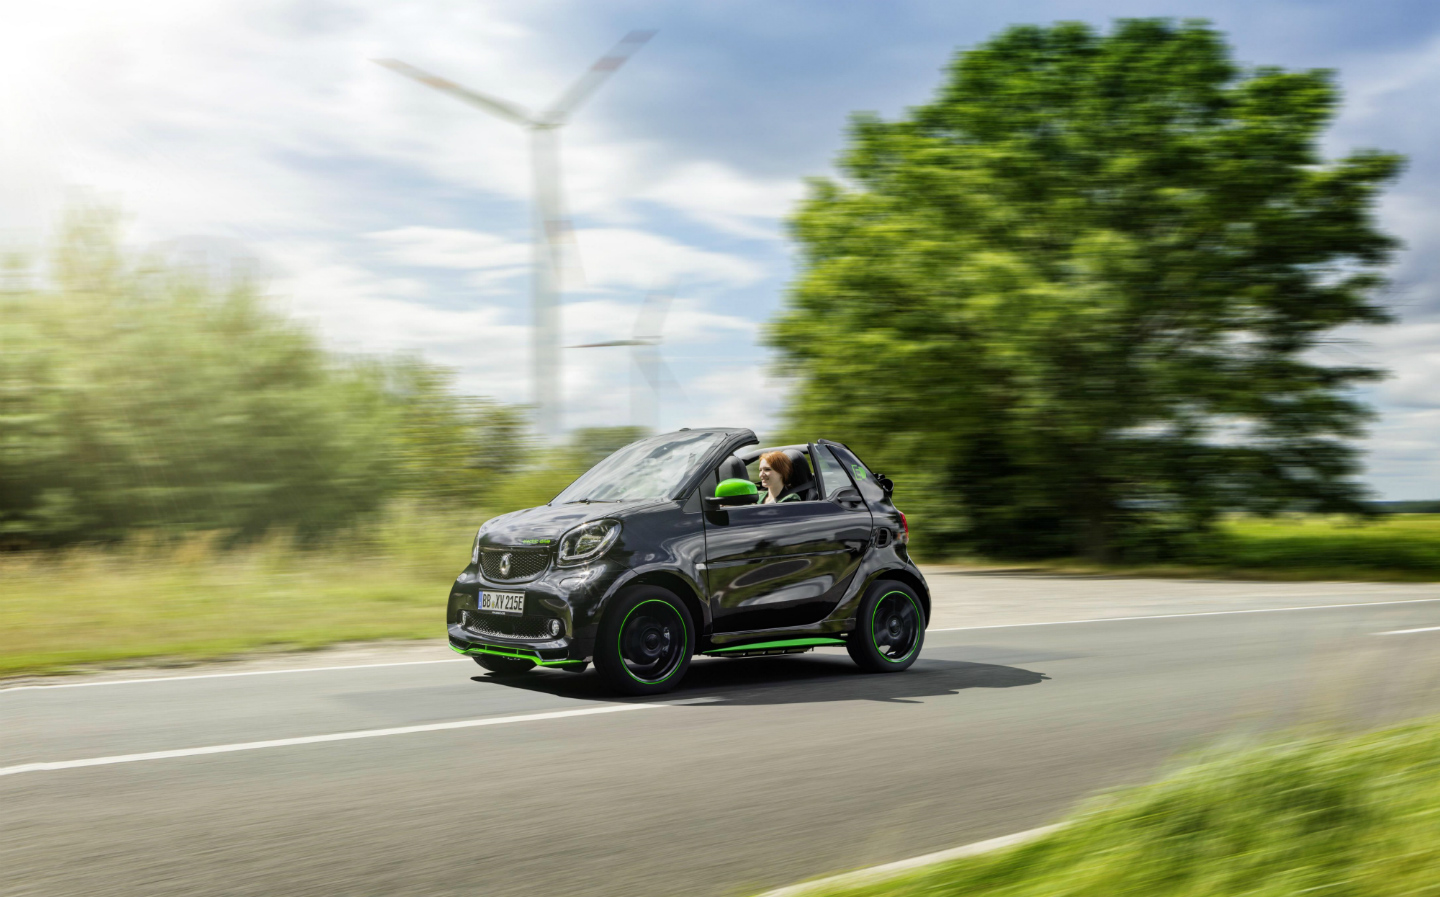 Smart electric drive is one of the the best cars to avoid paying road tax (VED)